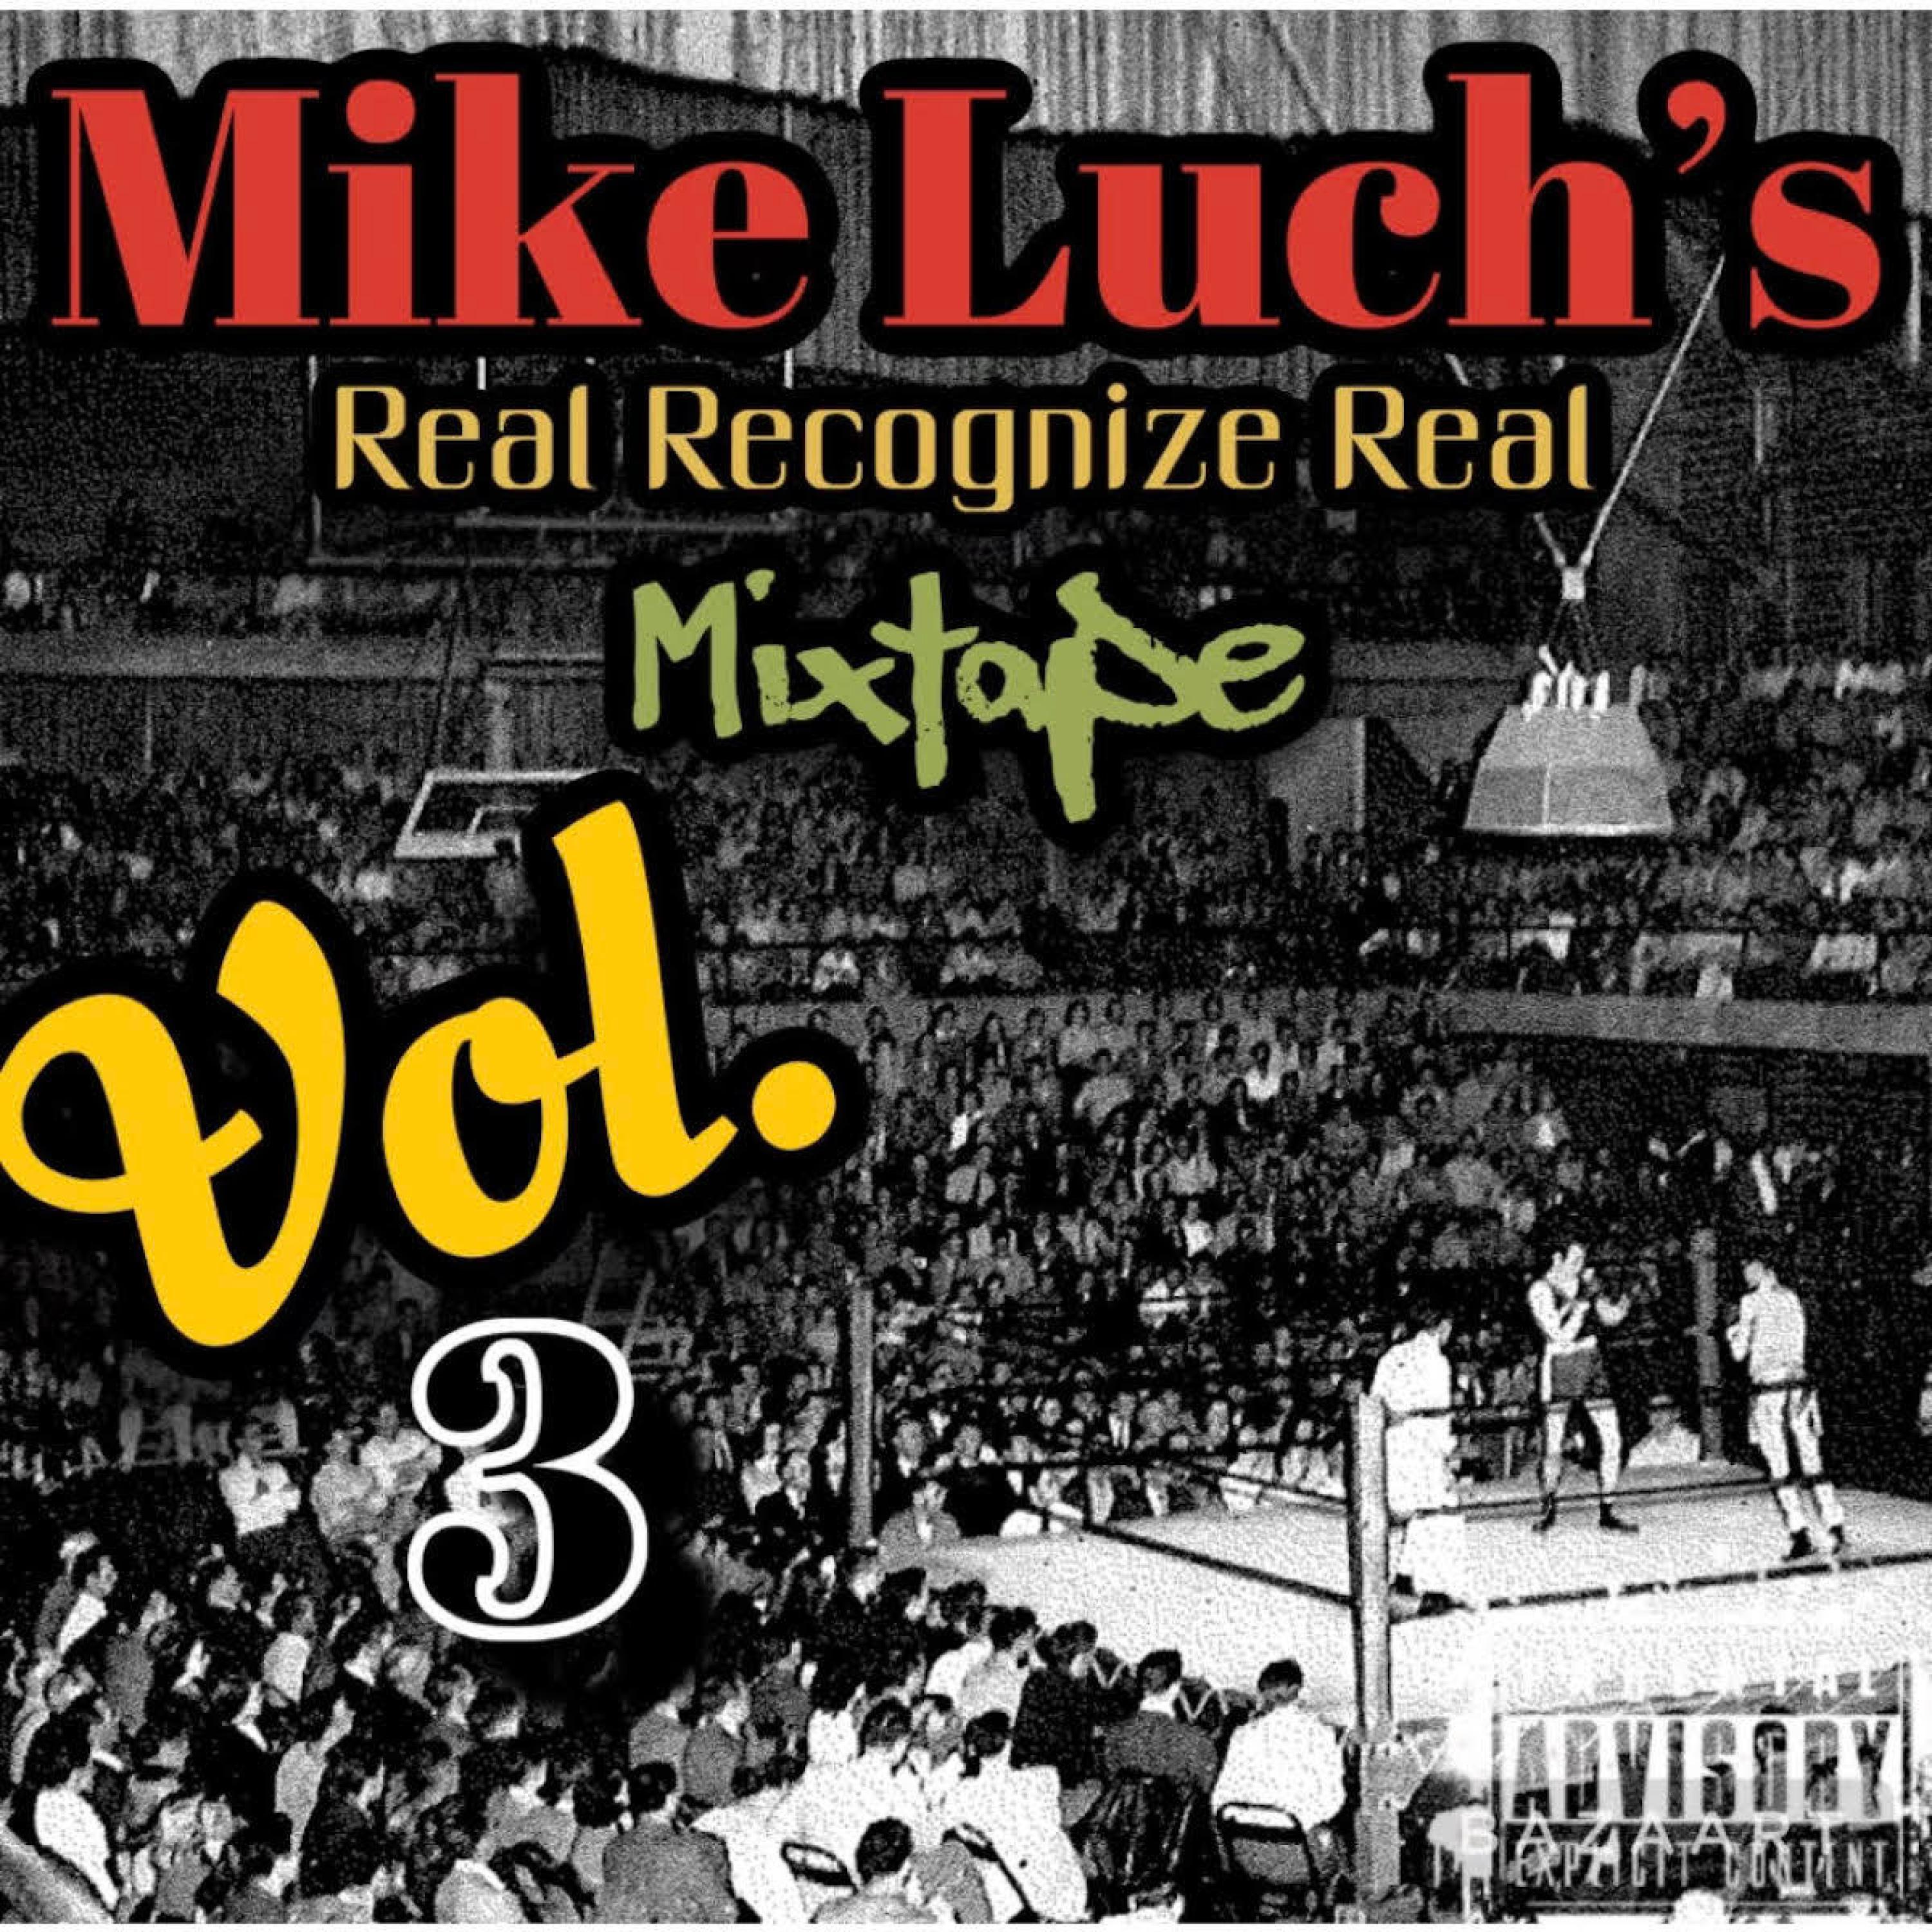 Mike Luch - Week 47